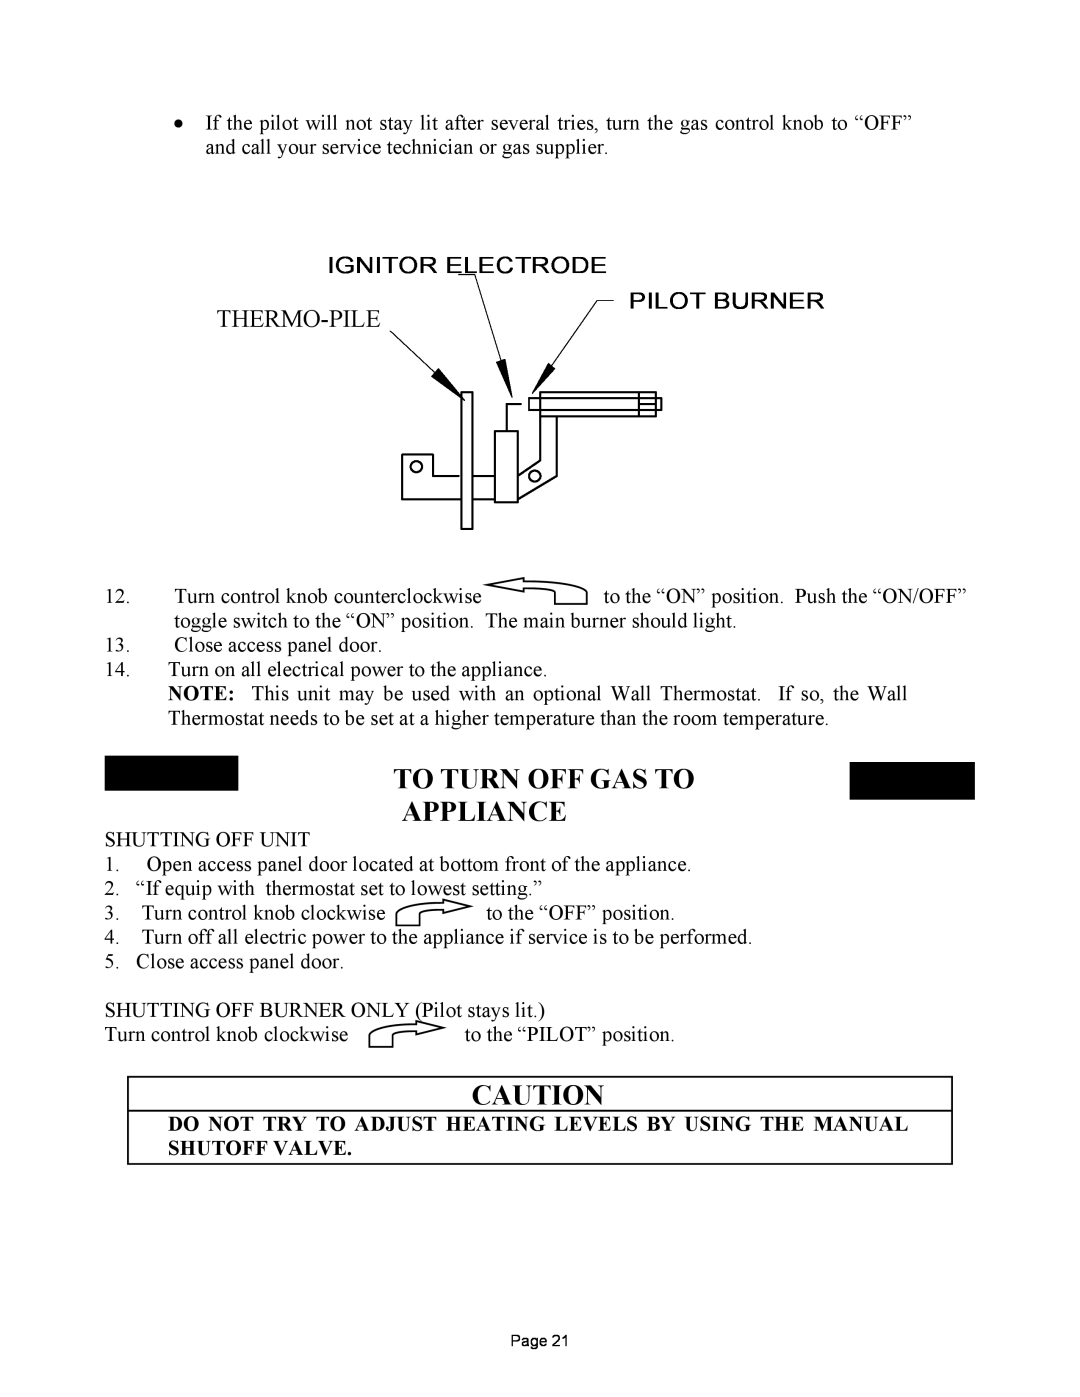 New Buck Corporation 32 manual To Turn Off Gas To Appliance, Ignitor Electrode, Pilot Burner 